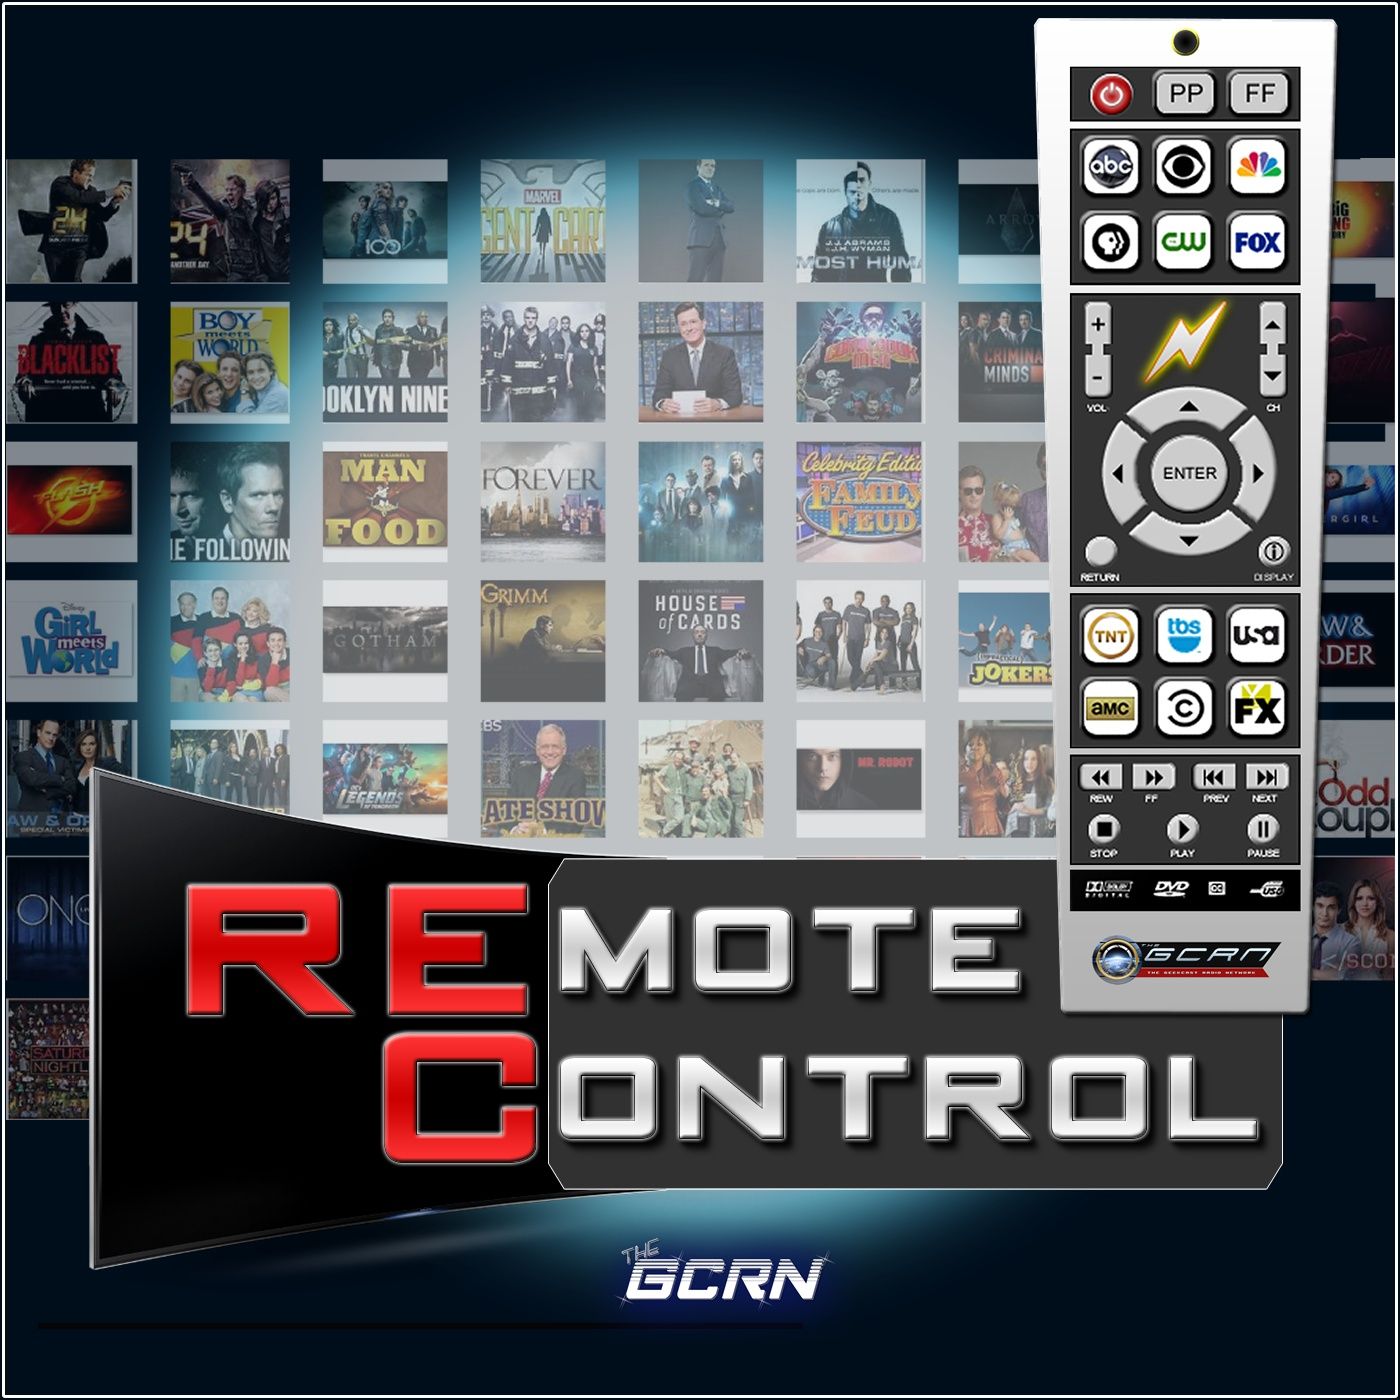 Remote Control – Pilot Premiere – Red Band Society